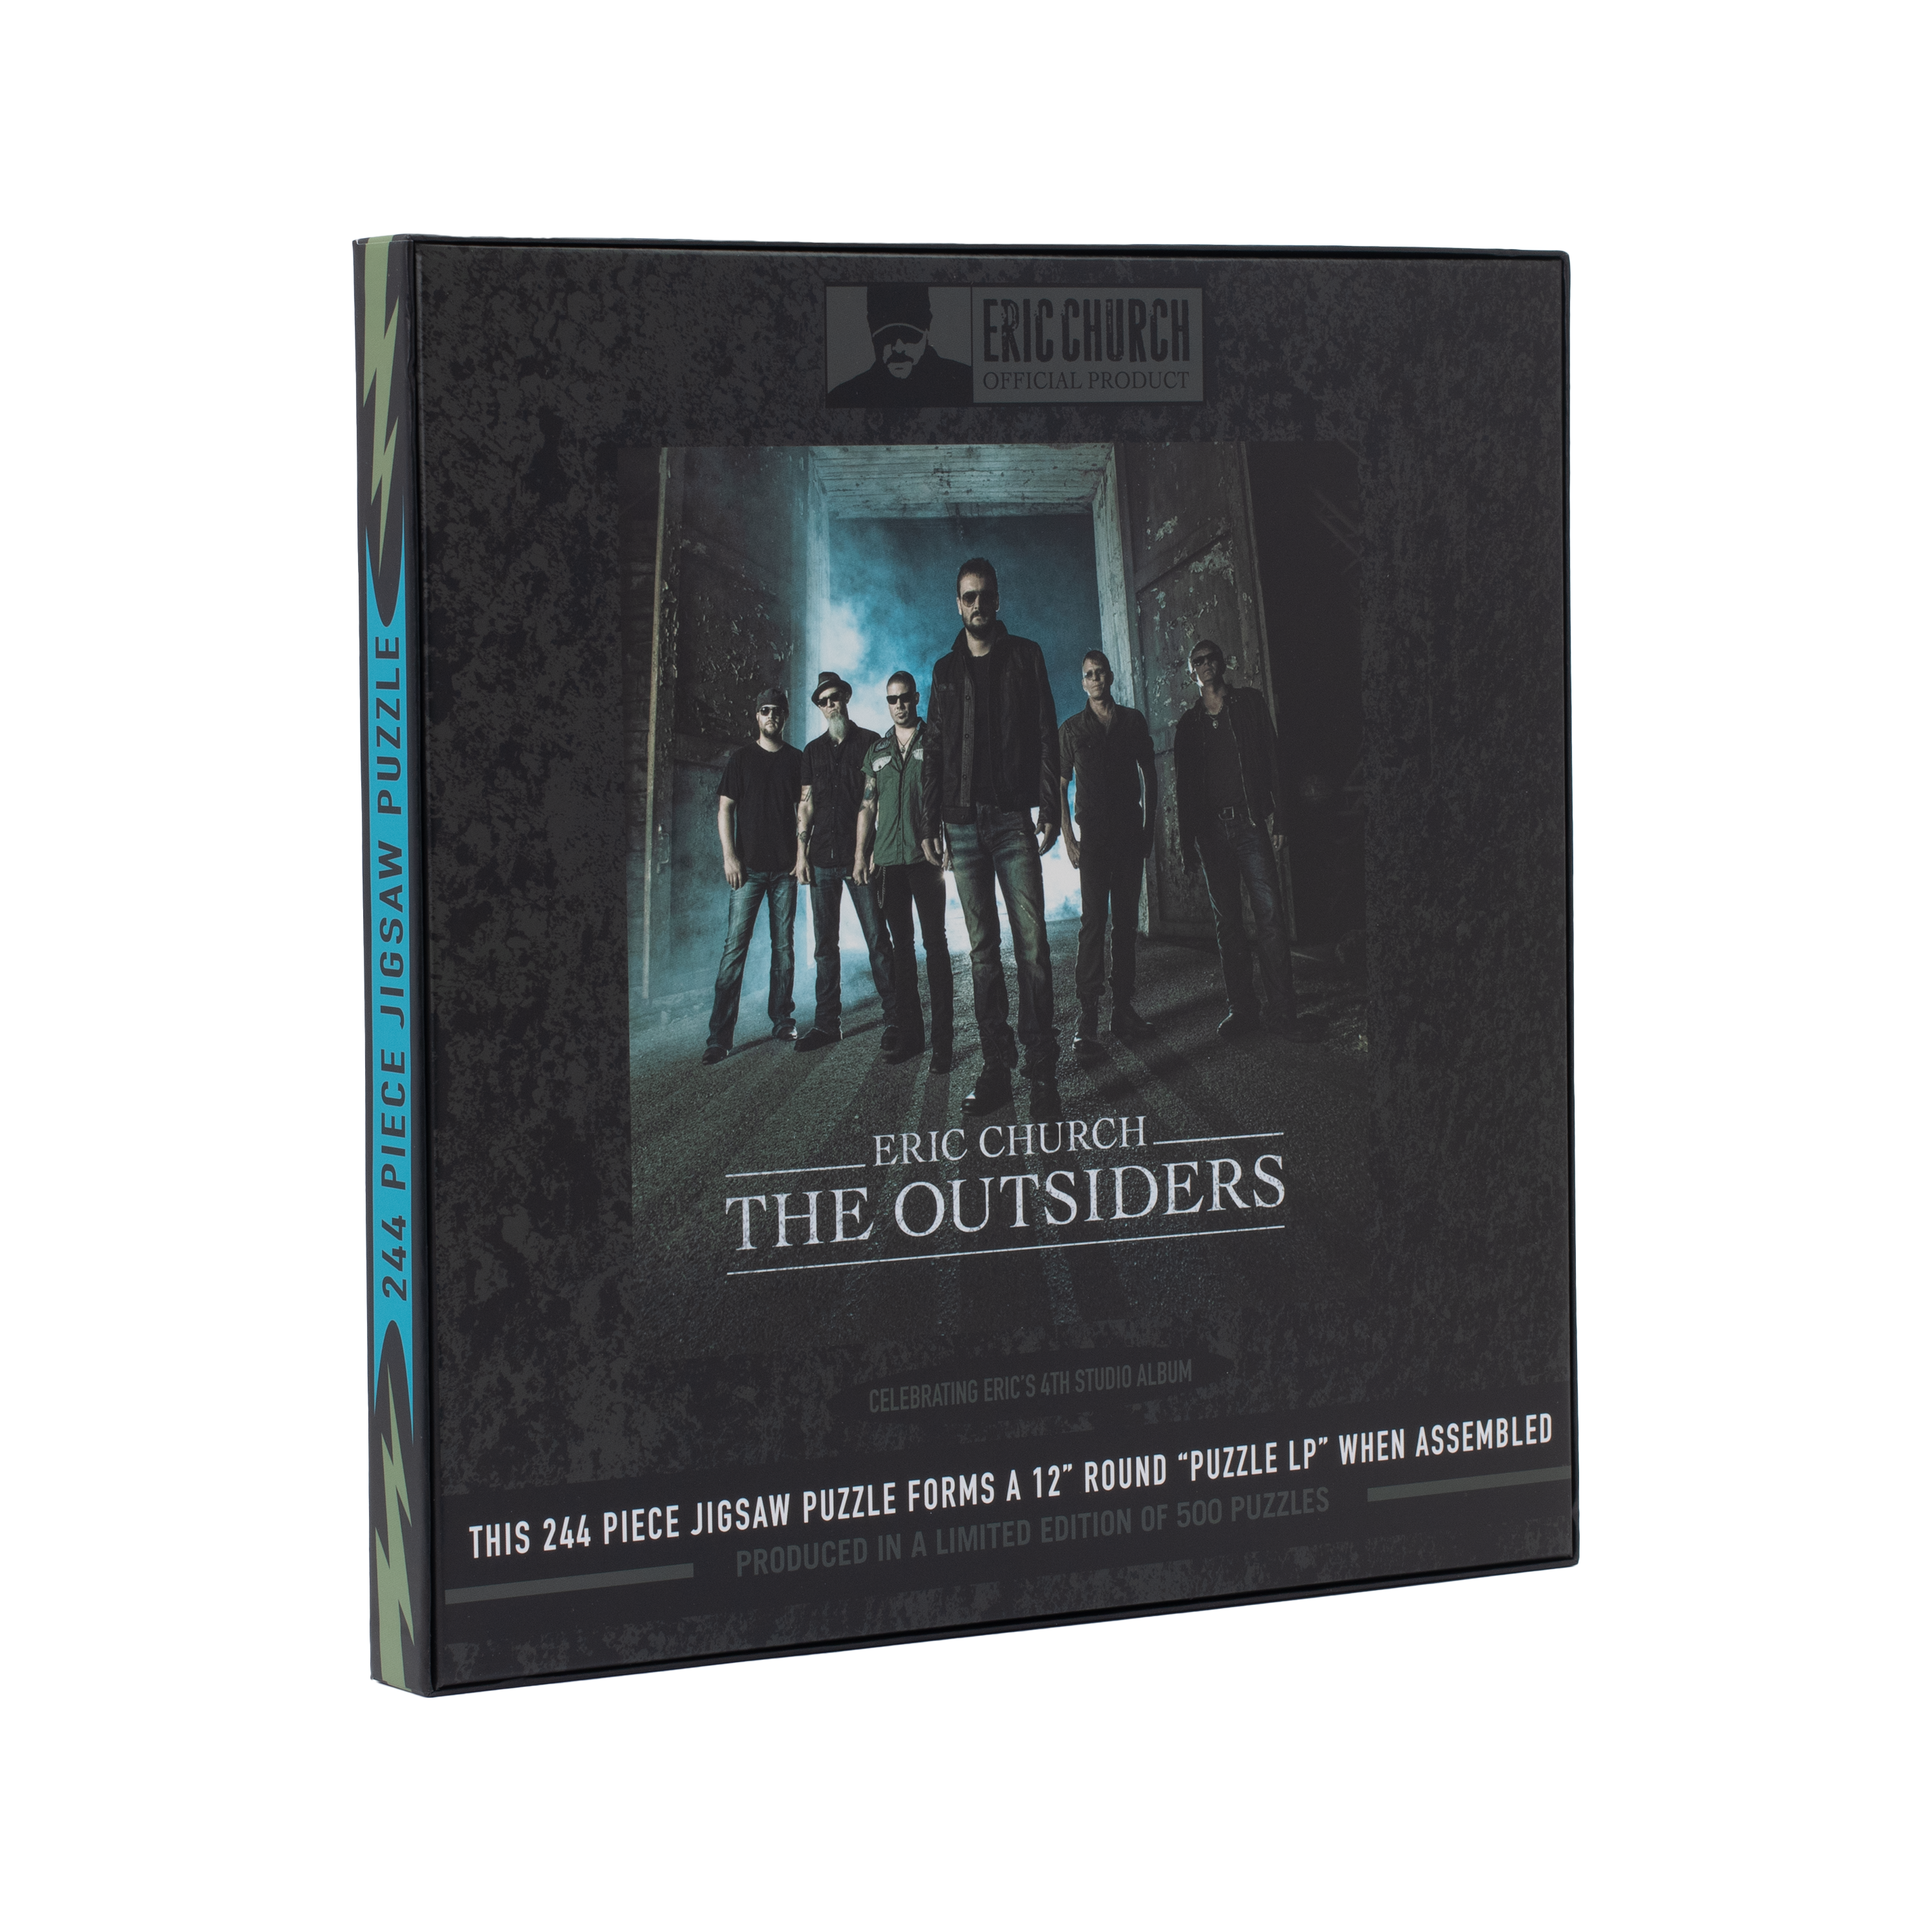 Limited Edition - The Outsiders LP Puzzle